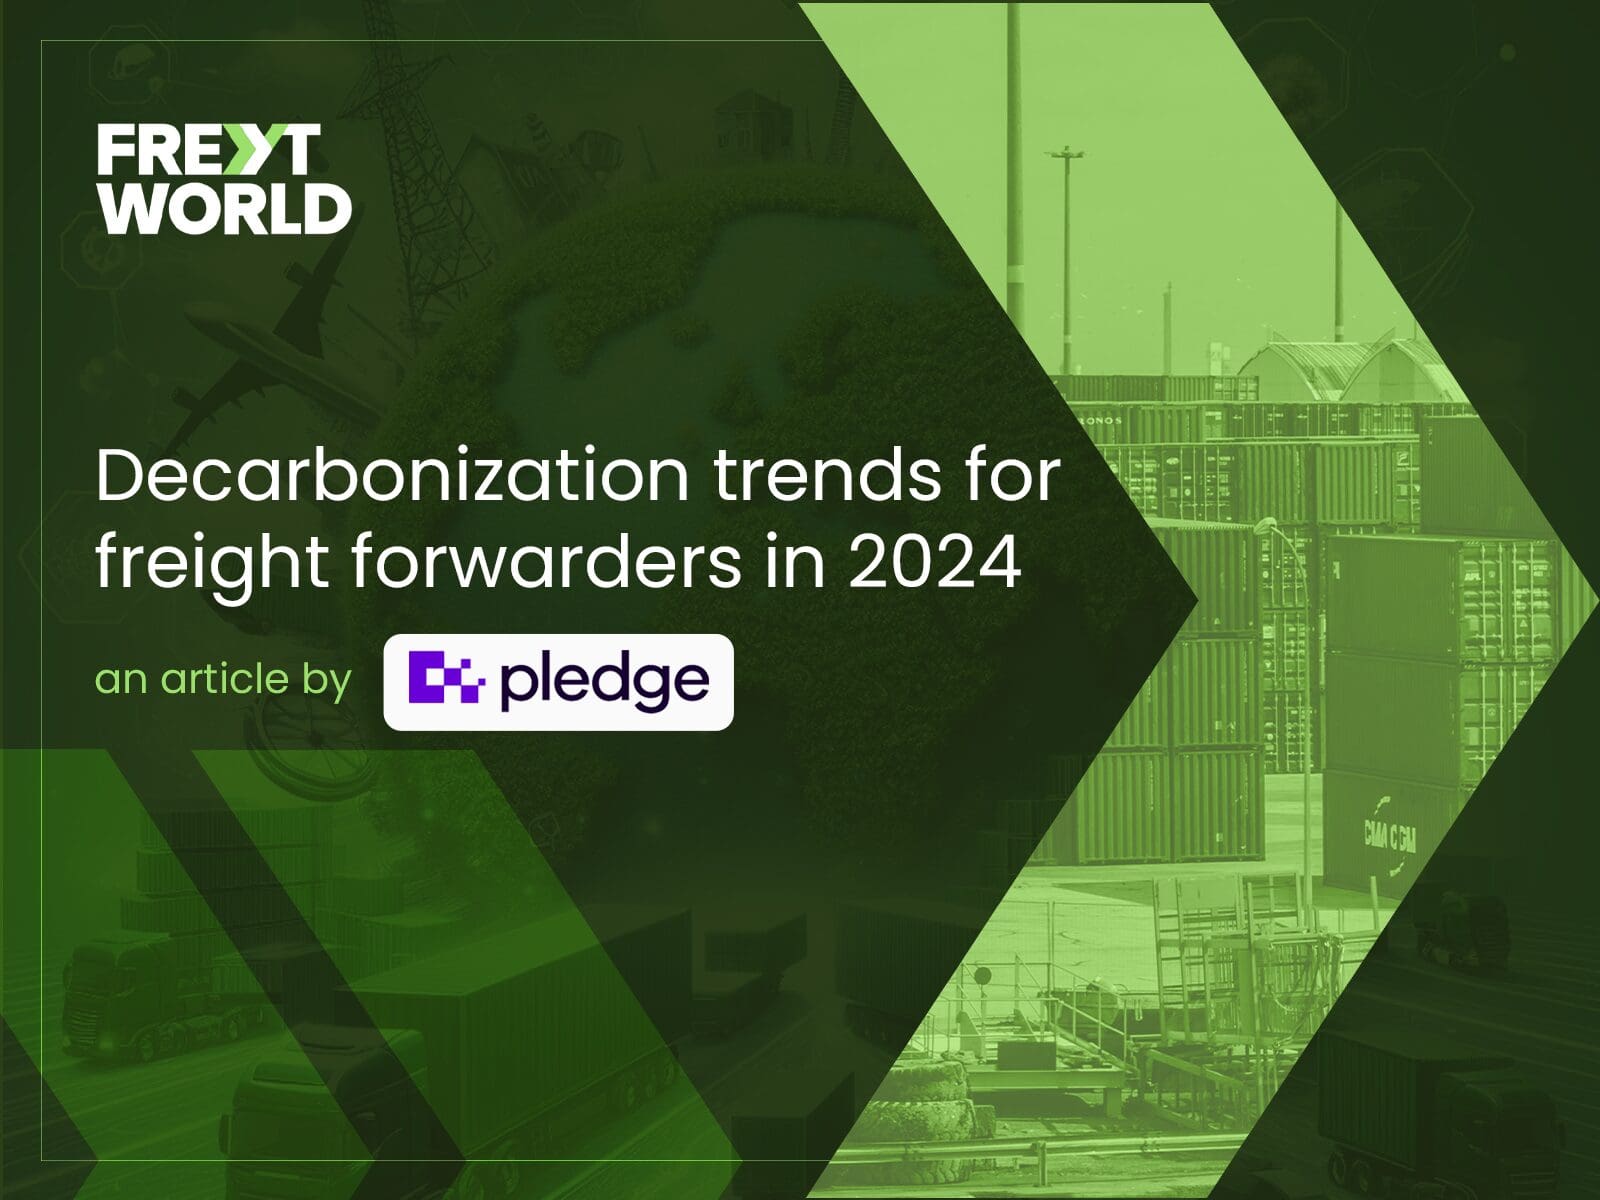 Decarbonization trends for freight forwarders in 2024